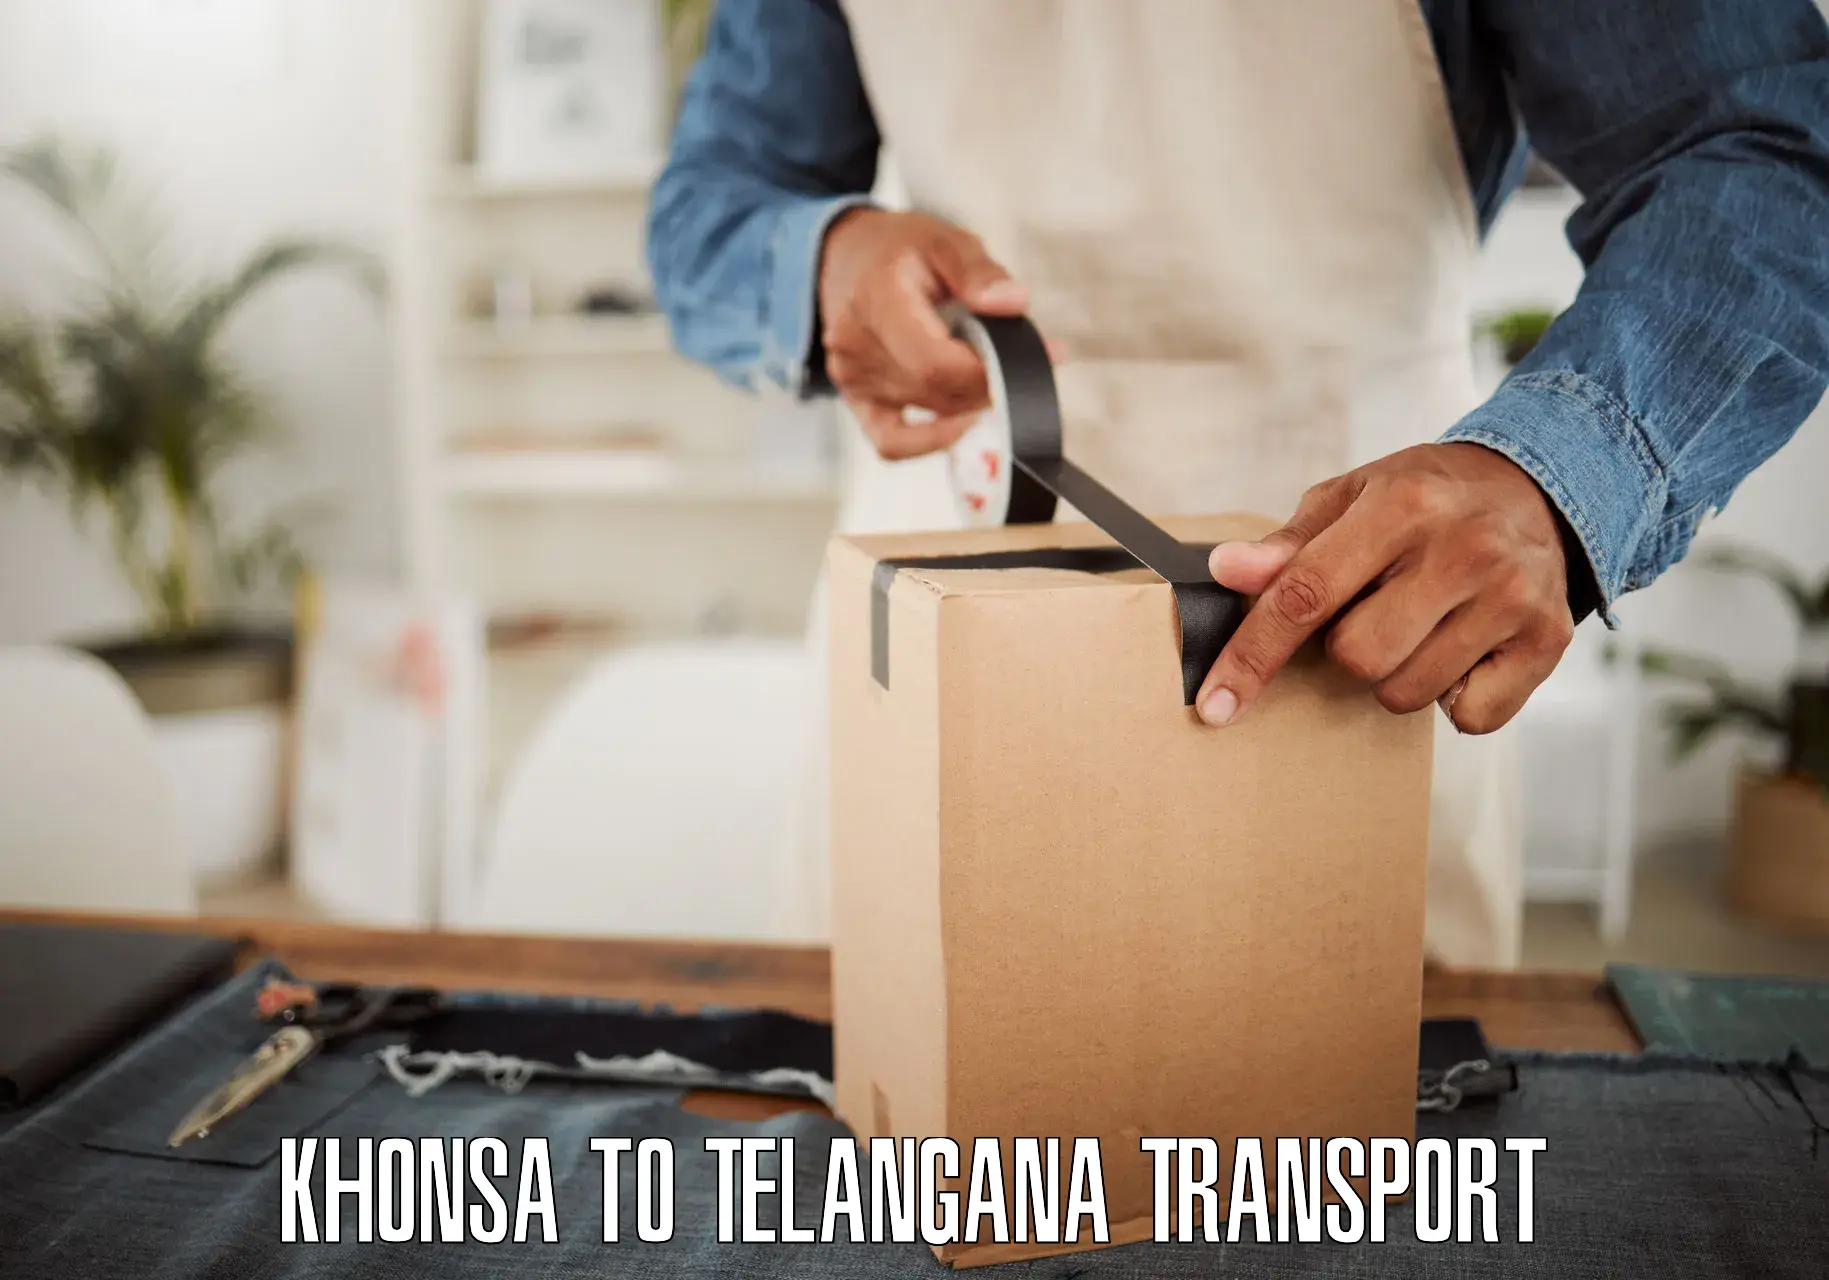 Parcel transport services in Khonsa to Warangal